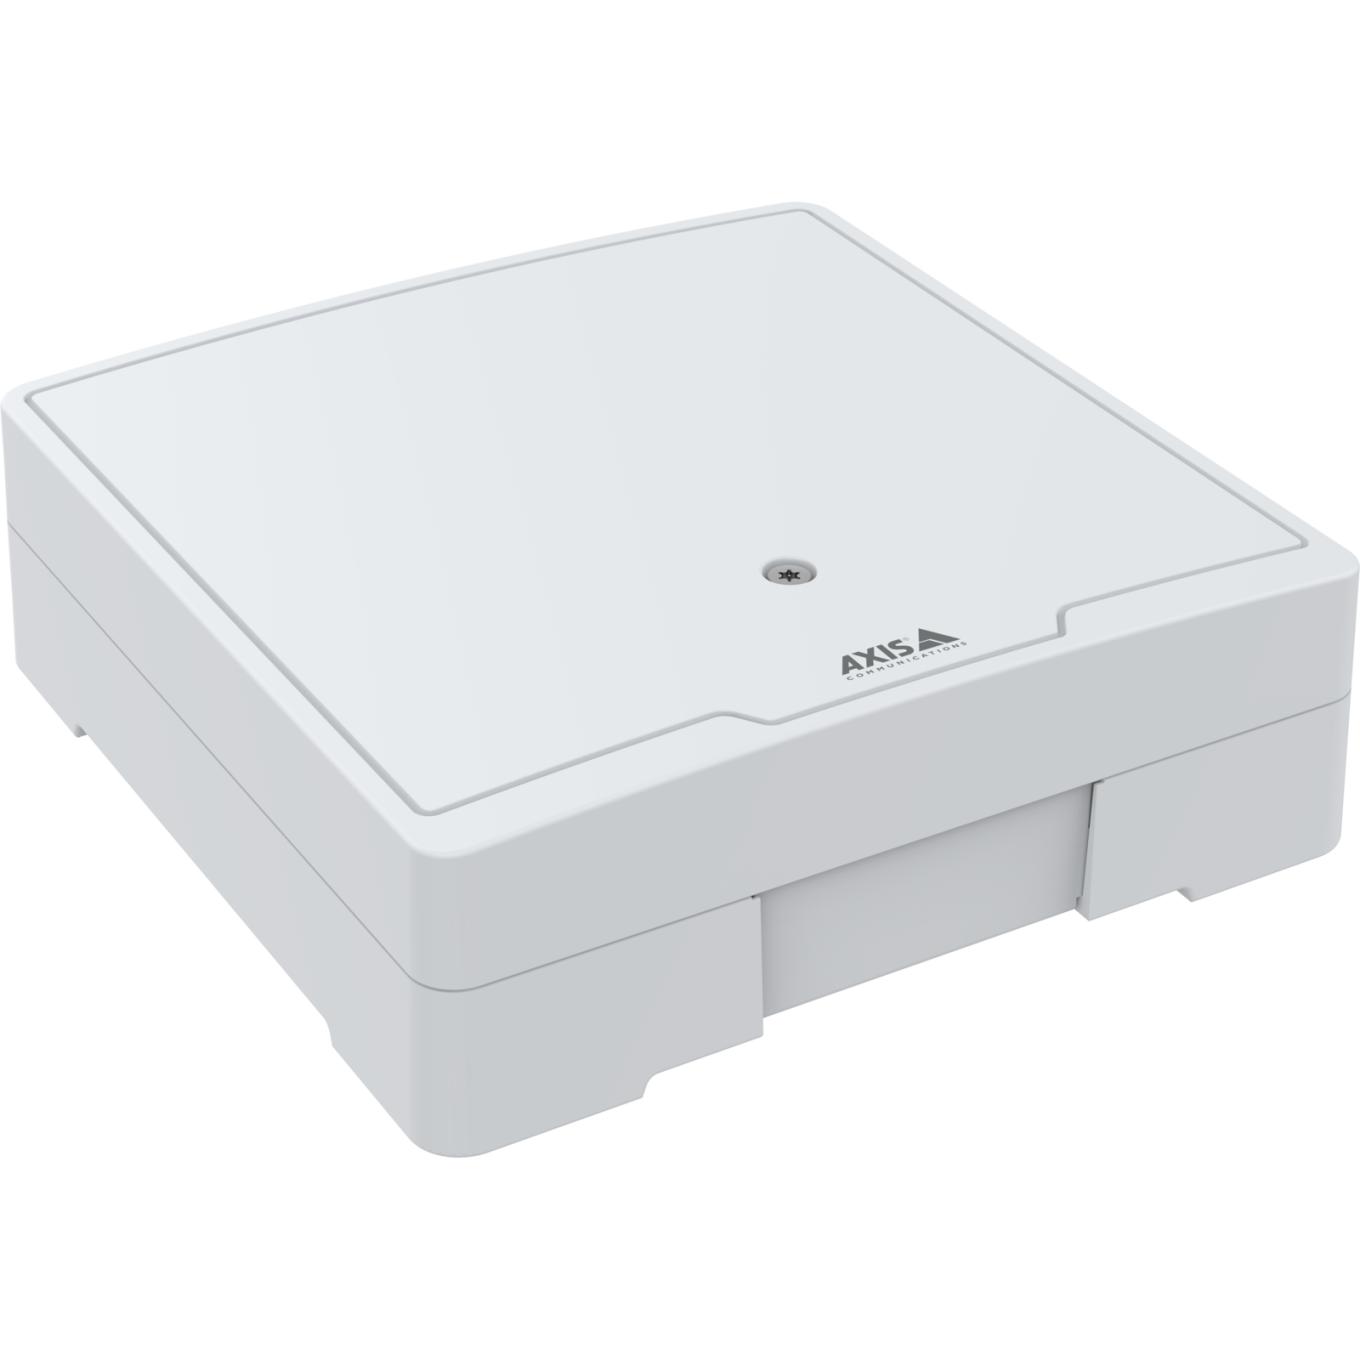 AXIS A1610 Network Door Controller | Axis Communications